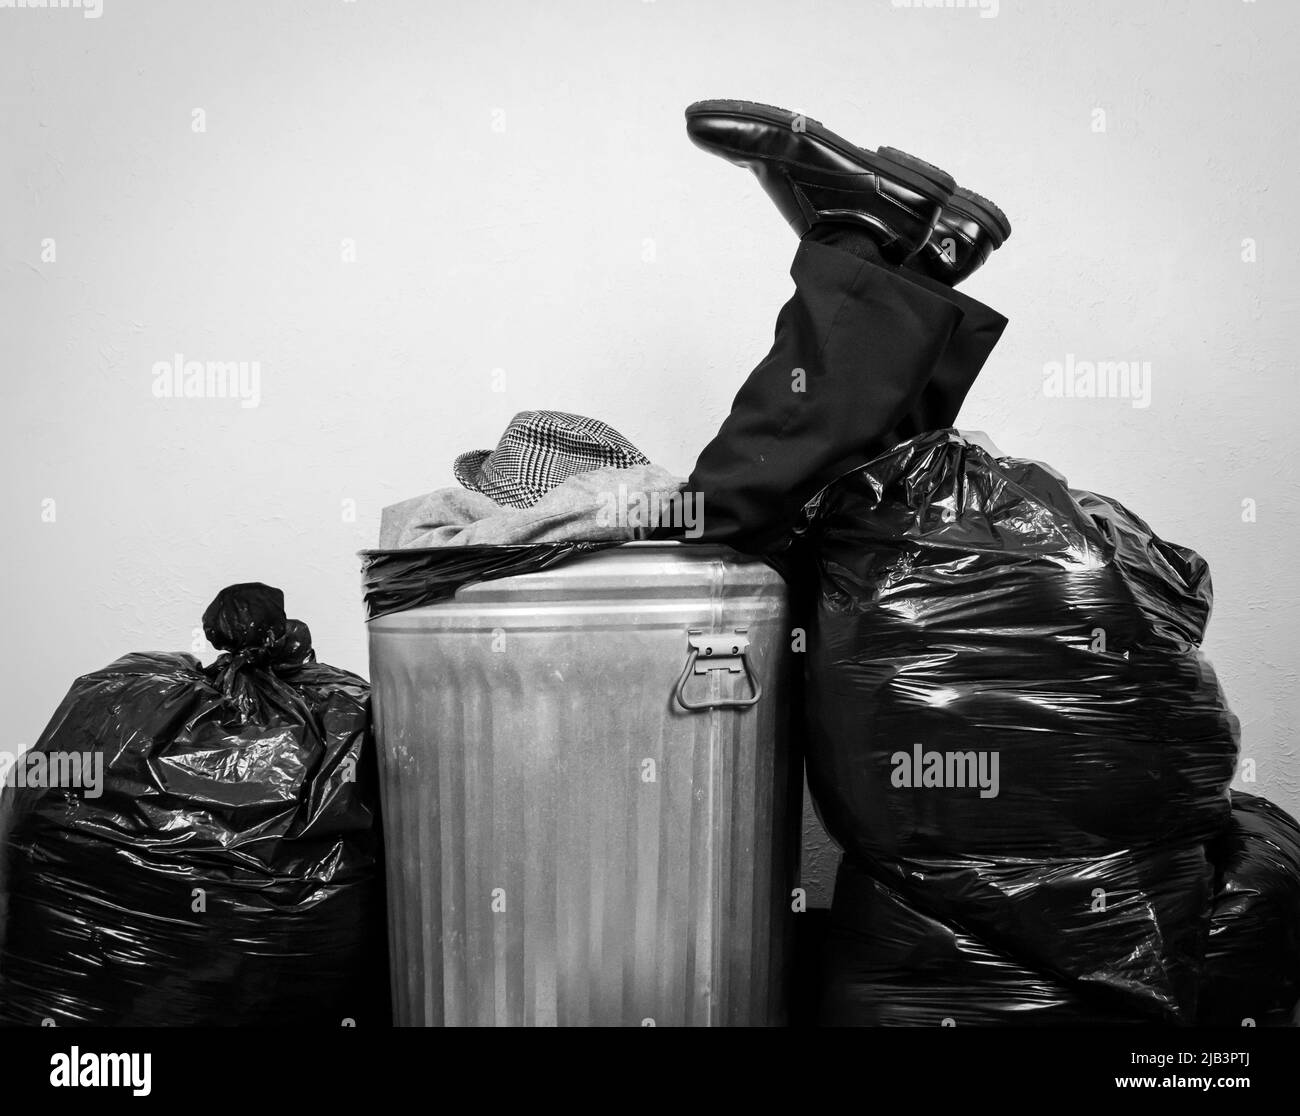 Businessman in Suit Sitting in Rubbish Bin Surrounded by Garbage Bags. Concept of Being Thrown Away by Capitalism and Greed. Stock Photo